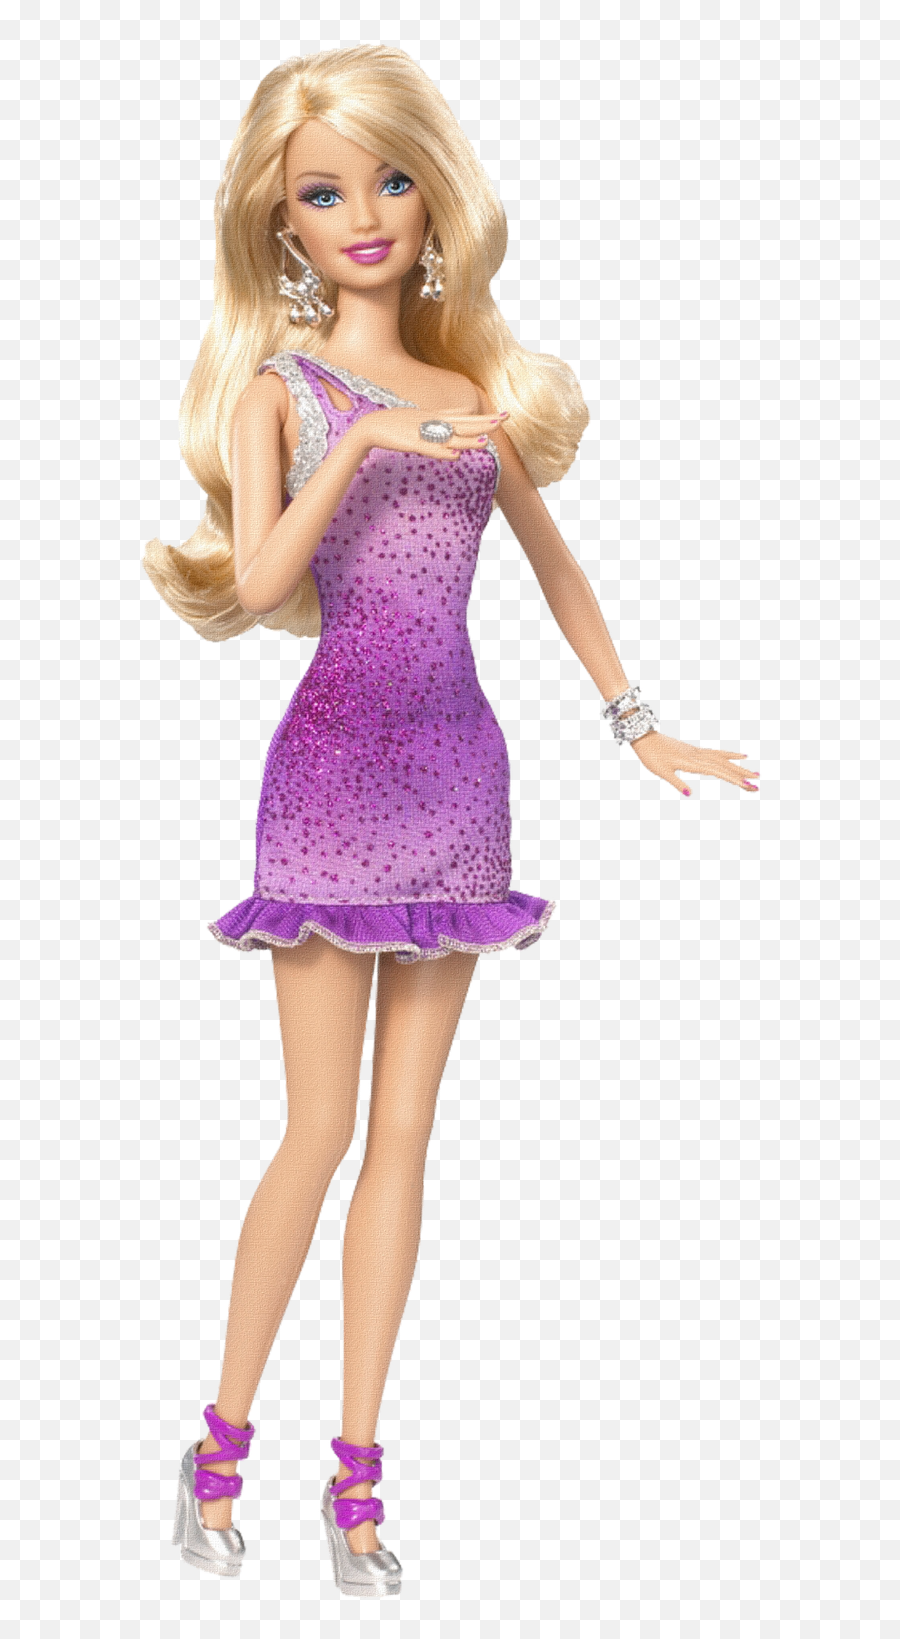 Barbie Clip Transparent U0026 Png Clipart Free Download - Ywd Barbie In A Fashion Fairytale Doll,Barbie Png